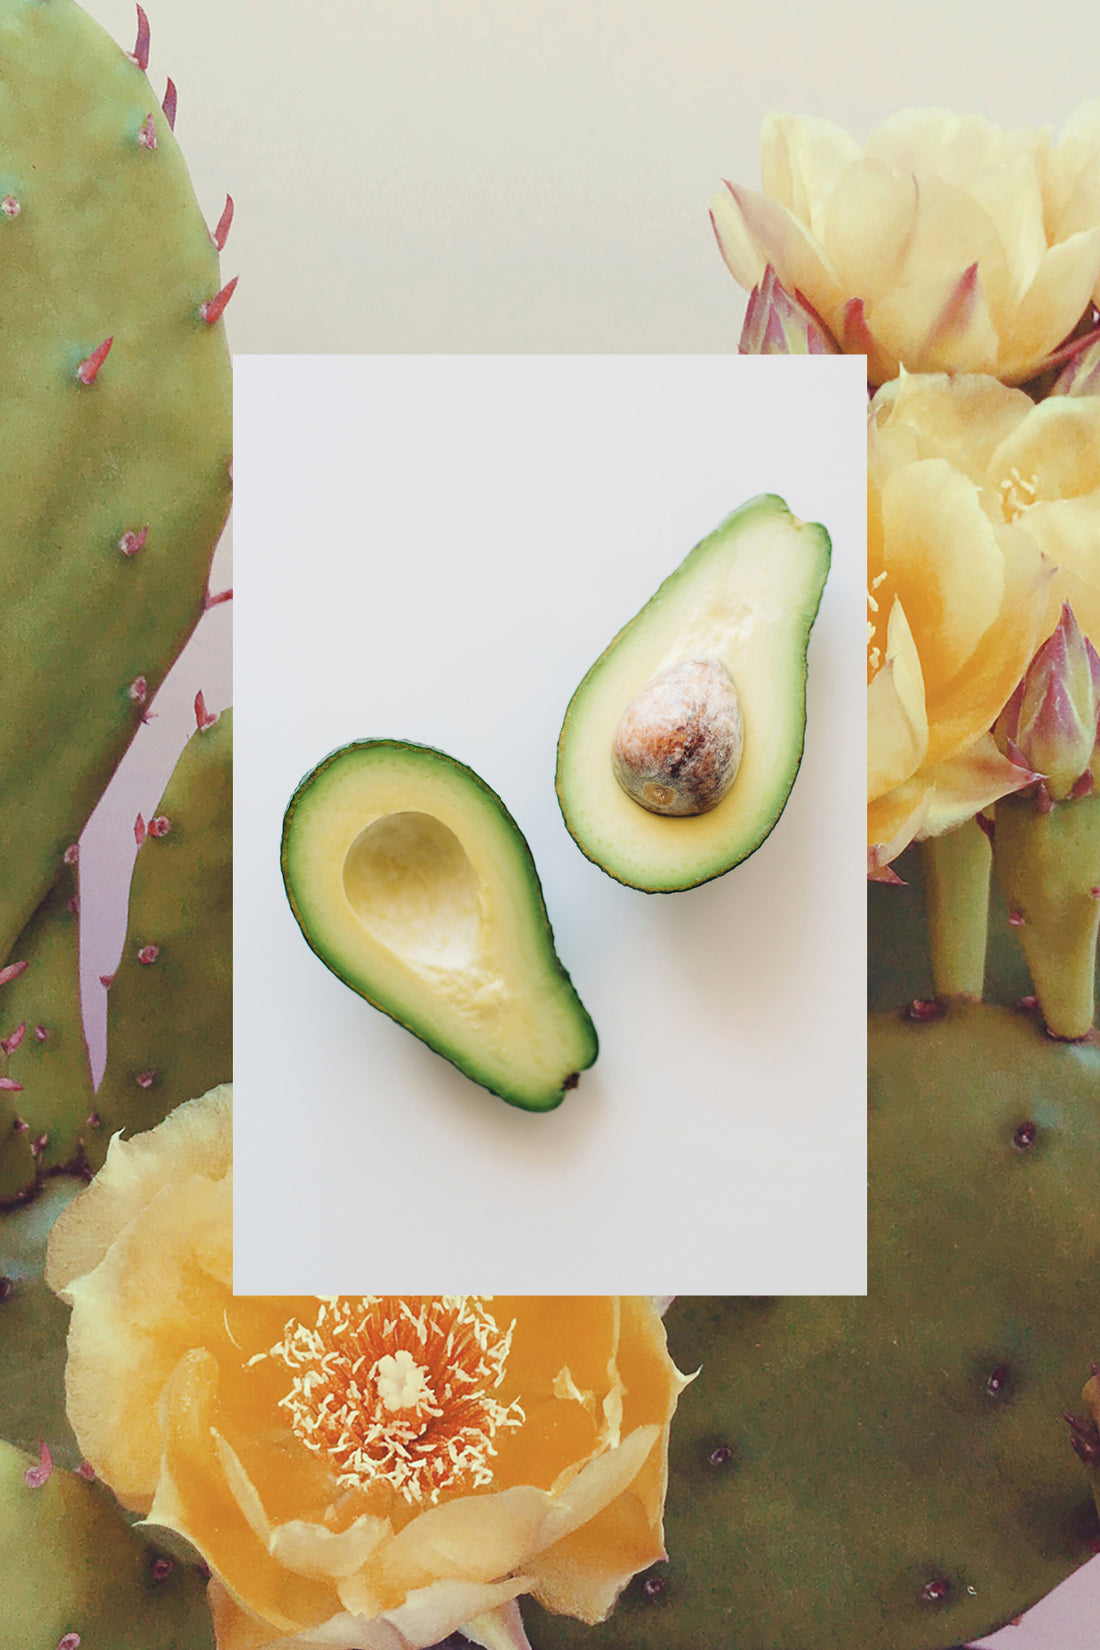 Two fresh avocado halves and cactus flower pear plant 